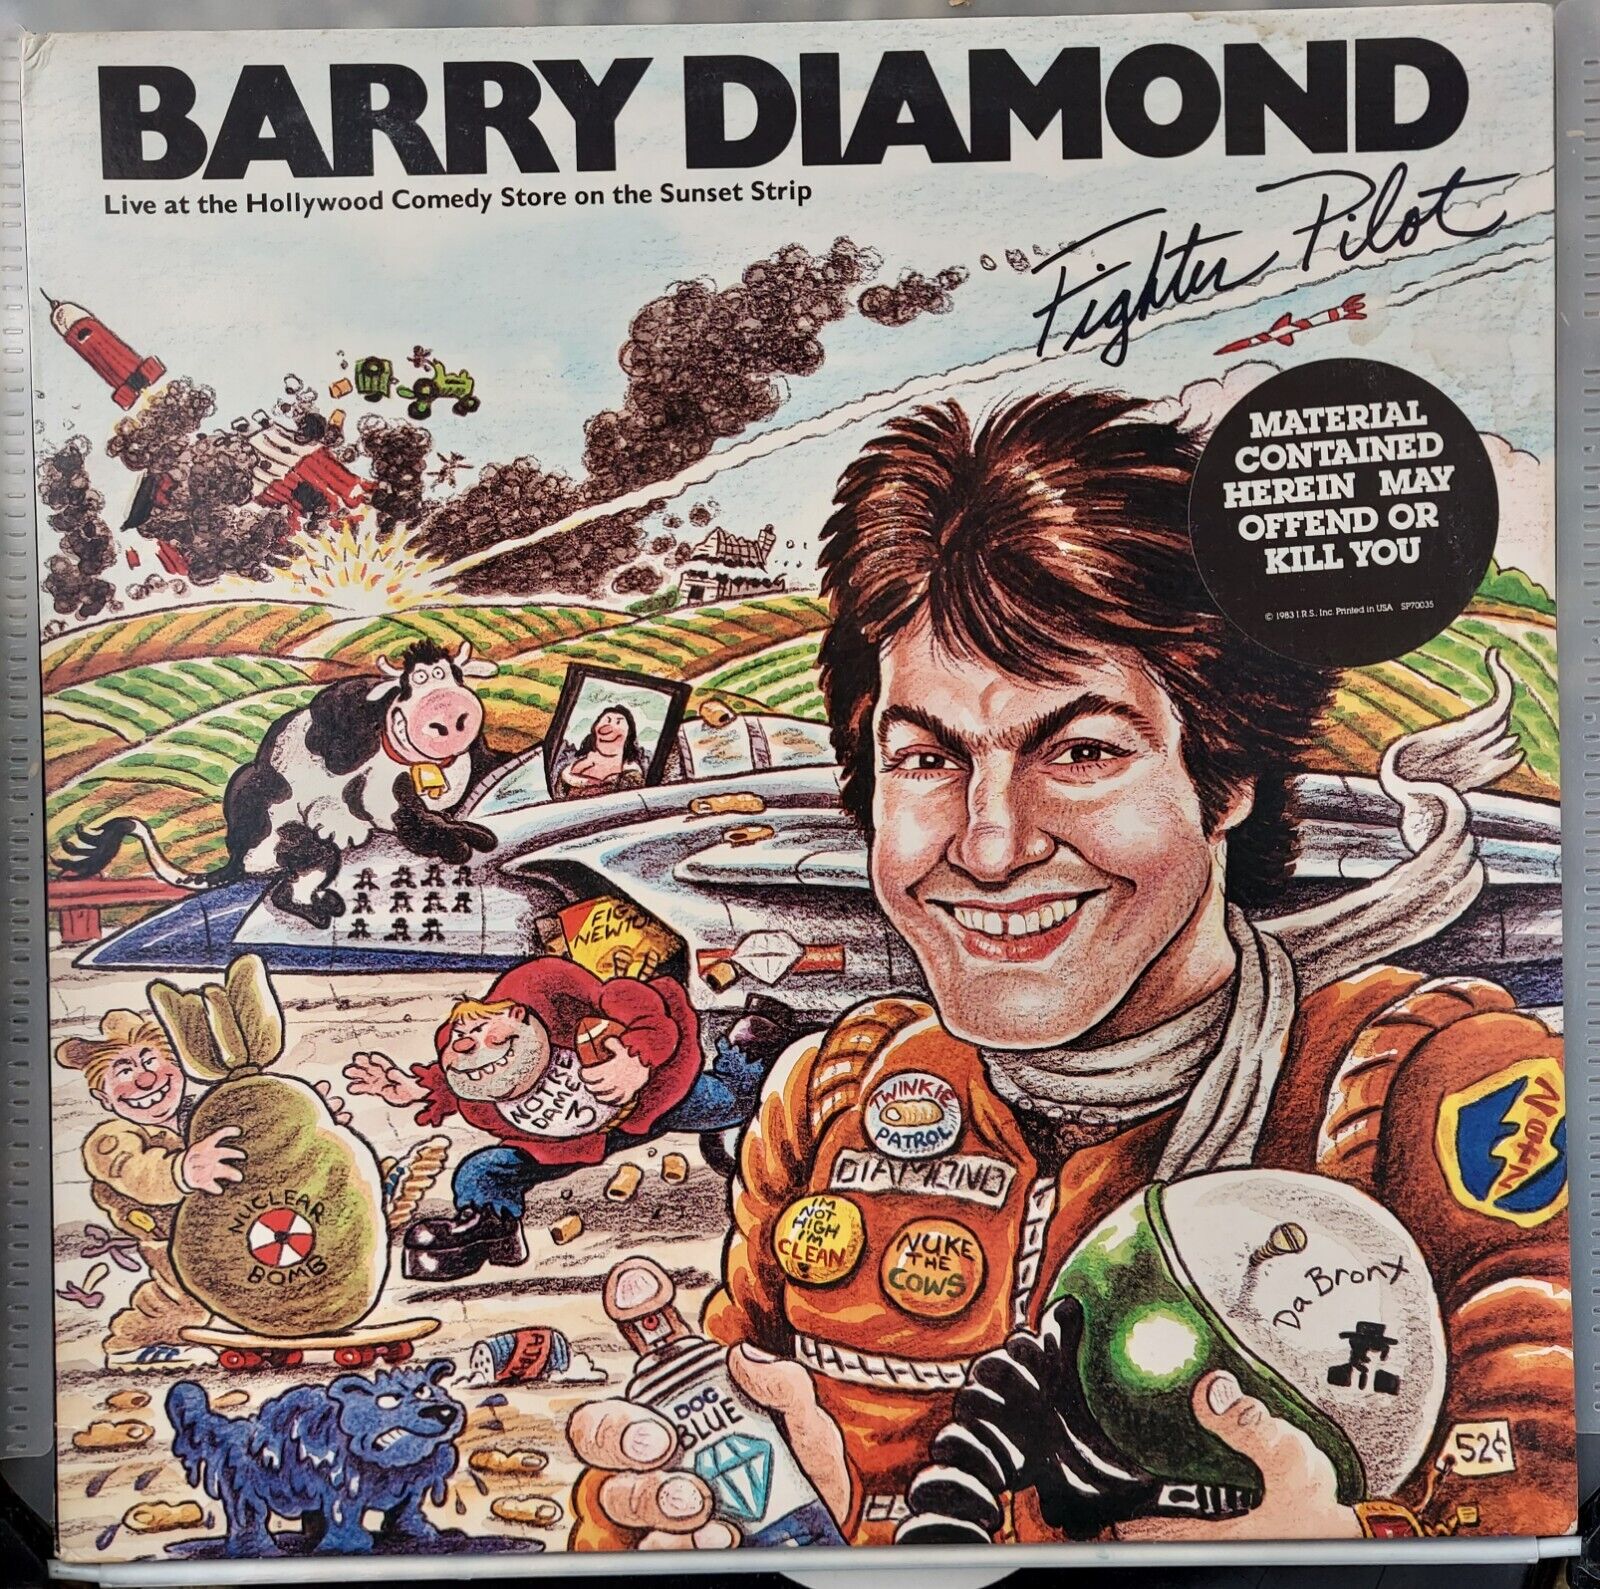 Barry Diamond, Fighter Pilot, Live at Hollywood Comedy Store, Vinyl LP, VG+